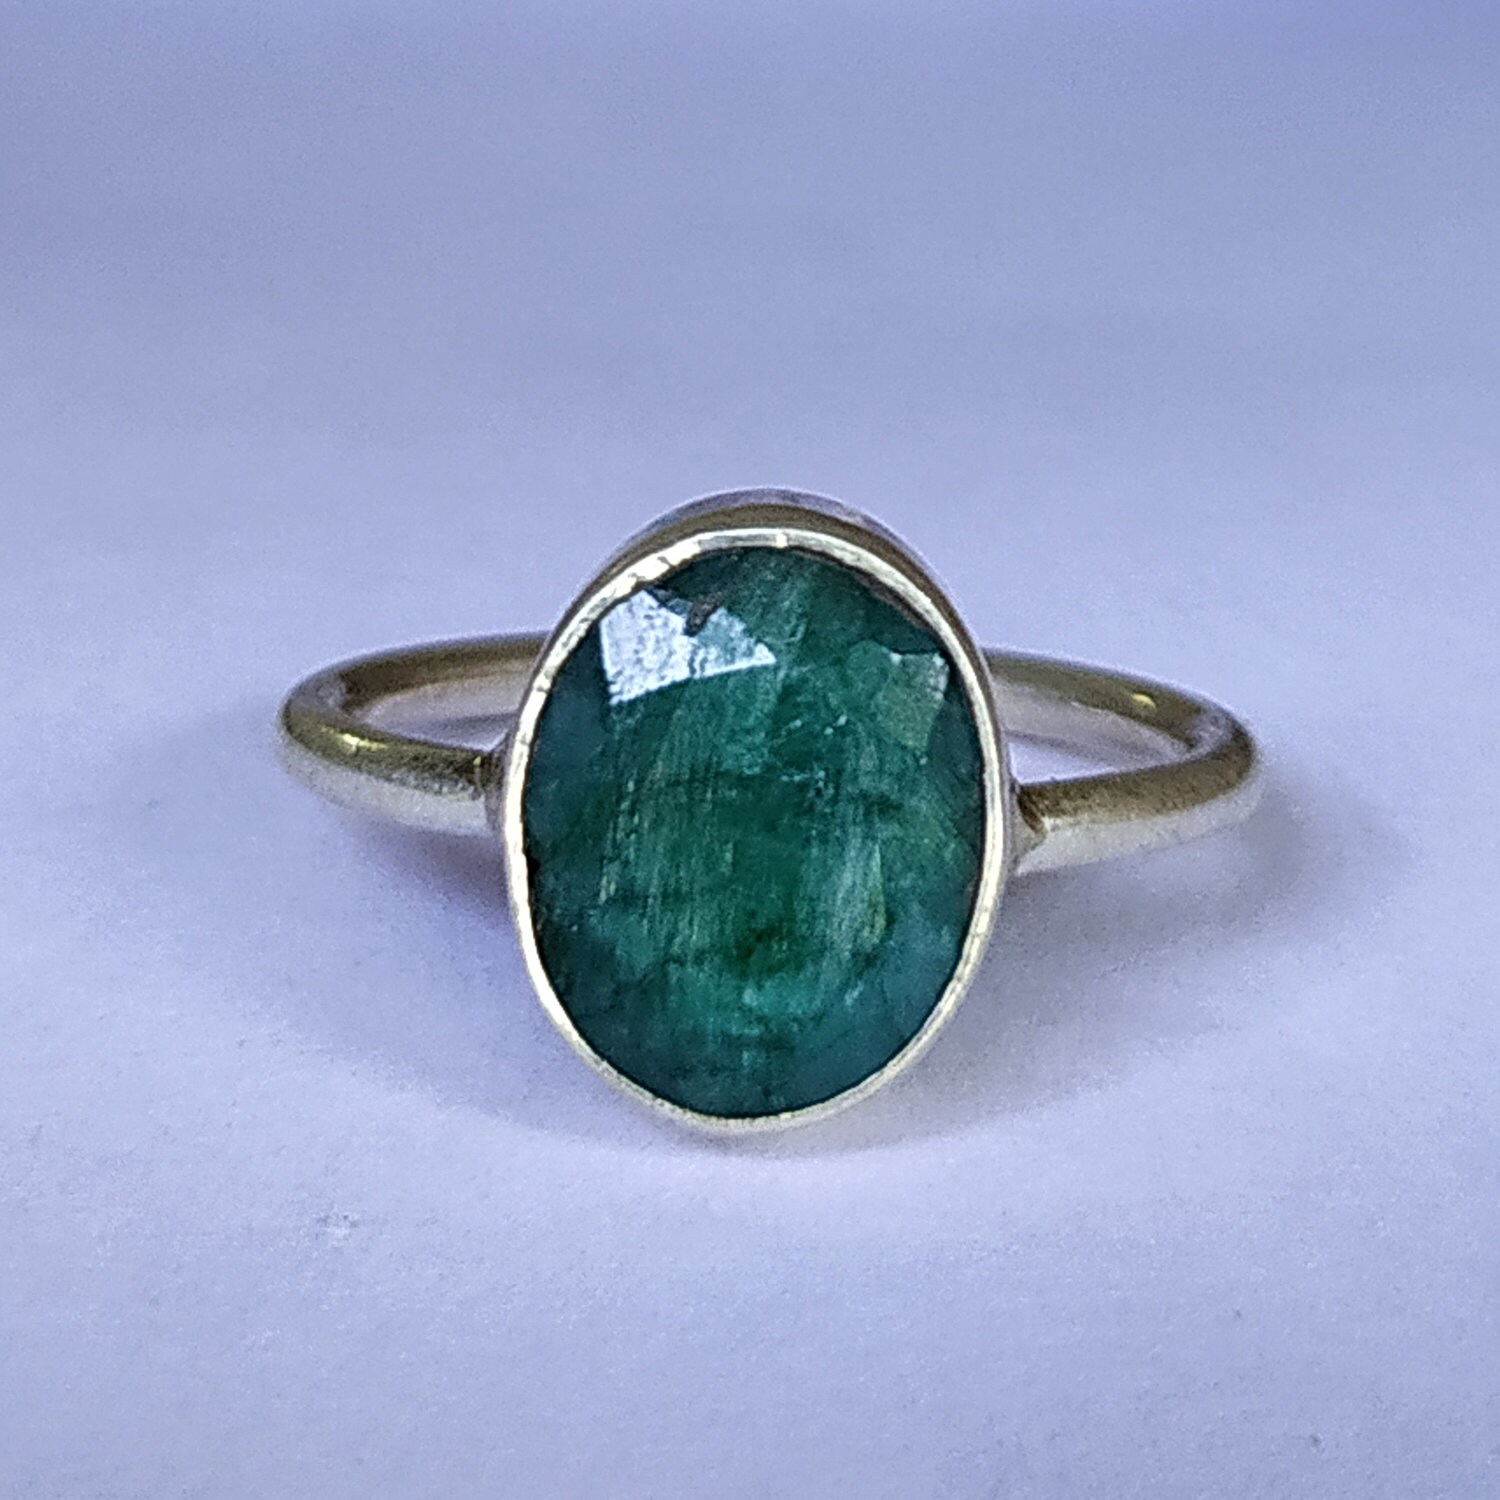 Emerald Ring Solid 925 Sterling Silver Ring Emerald Gemstone - Etsy